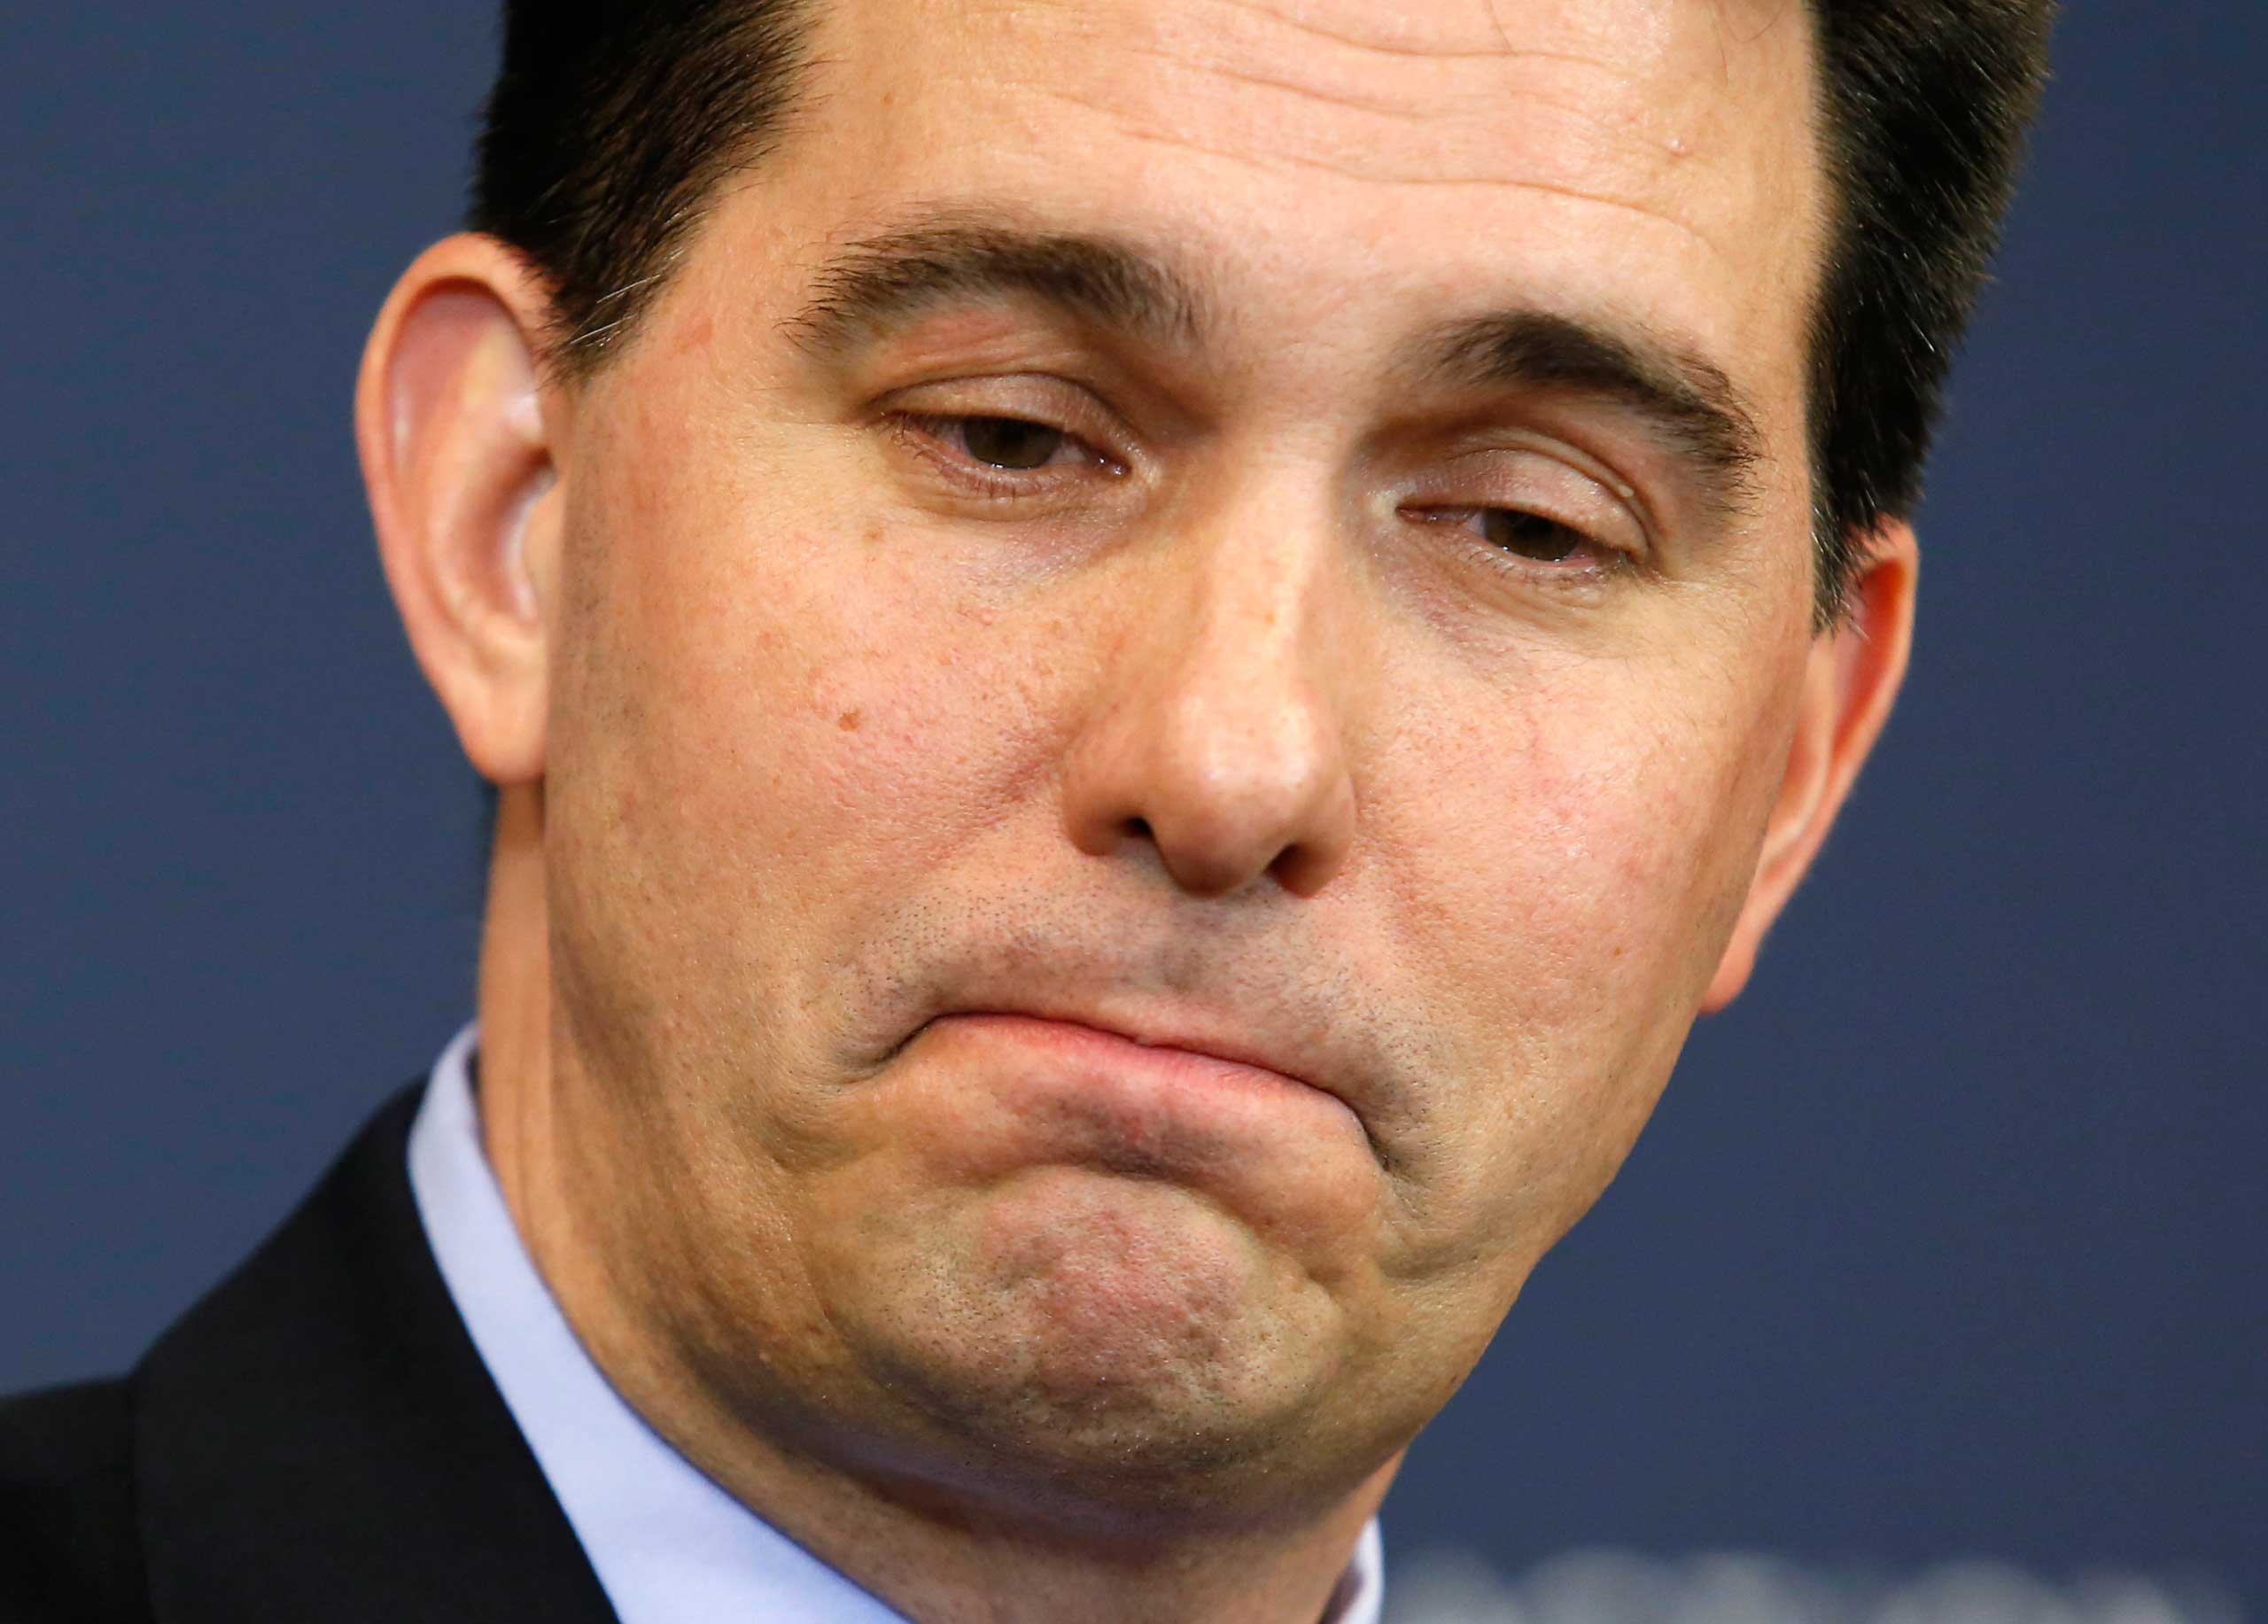 Wisconsin Governor Scott Walker participates in a panel discussion at the American Action Forum in Washington, Jan. 30, 2015. (Yuri Gripas—Reuters)